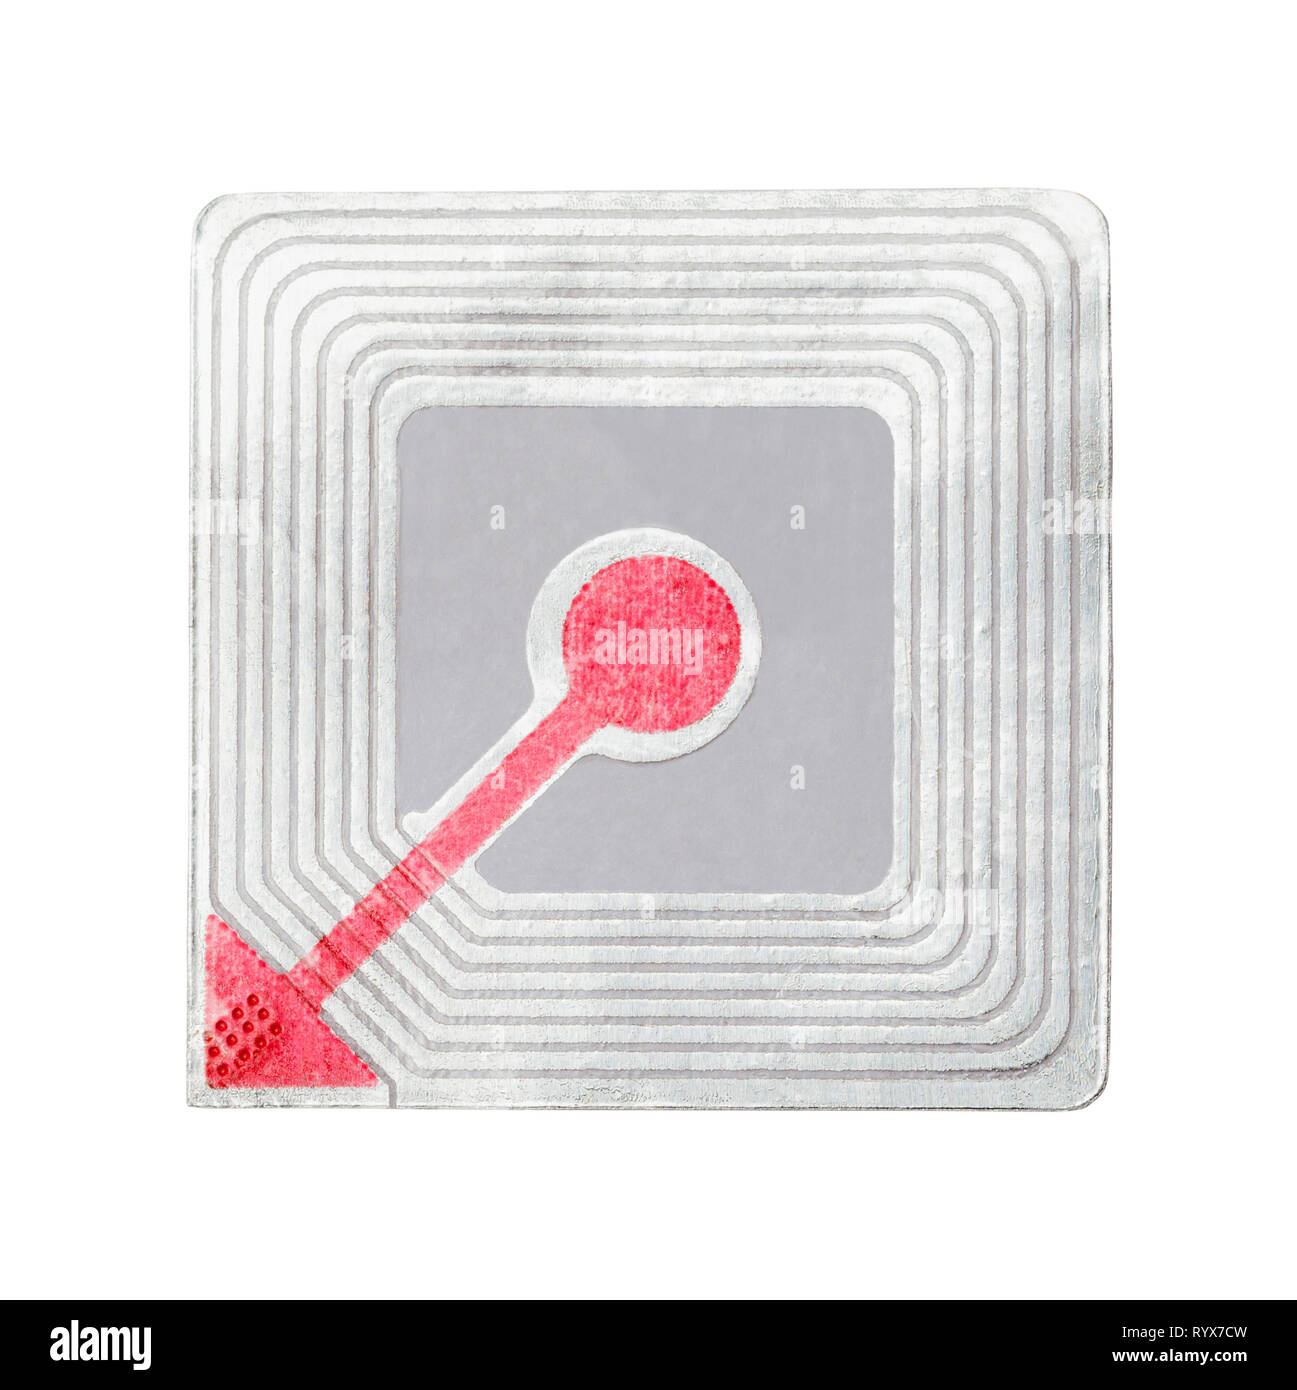 Square Security Tag Isolated on White Background. Stock Photo